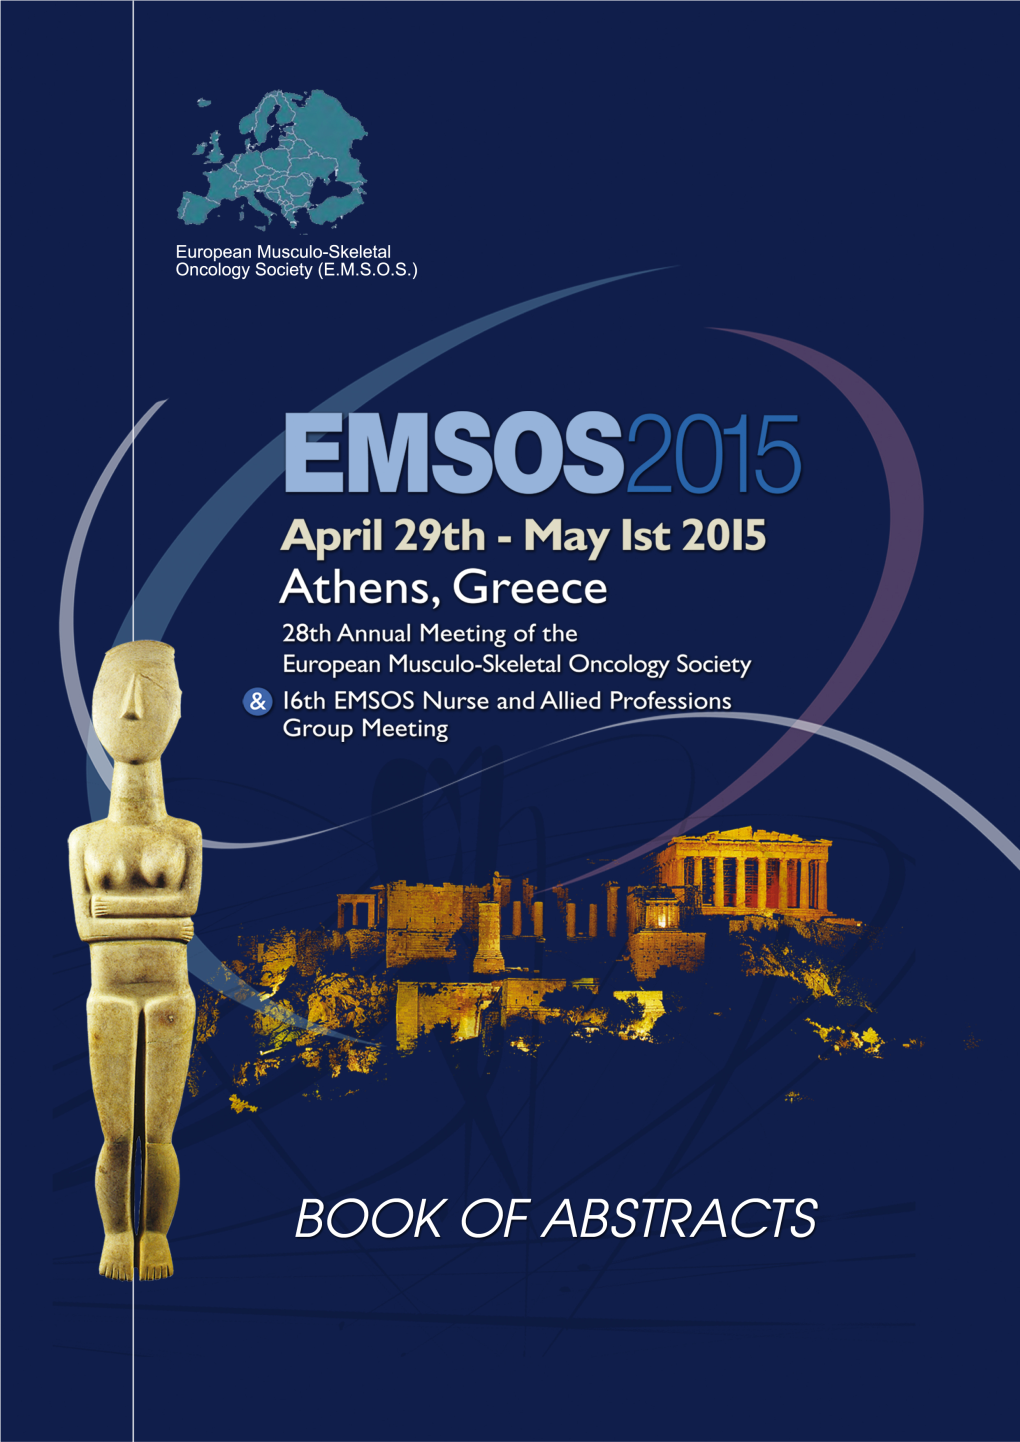 2015 EMSOS Book of Abstracts.Pdf 8.52 MB